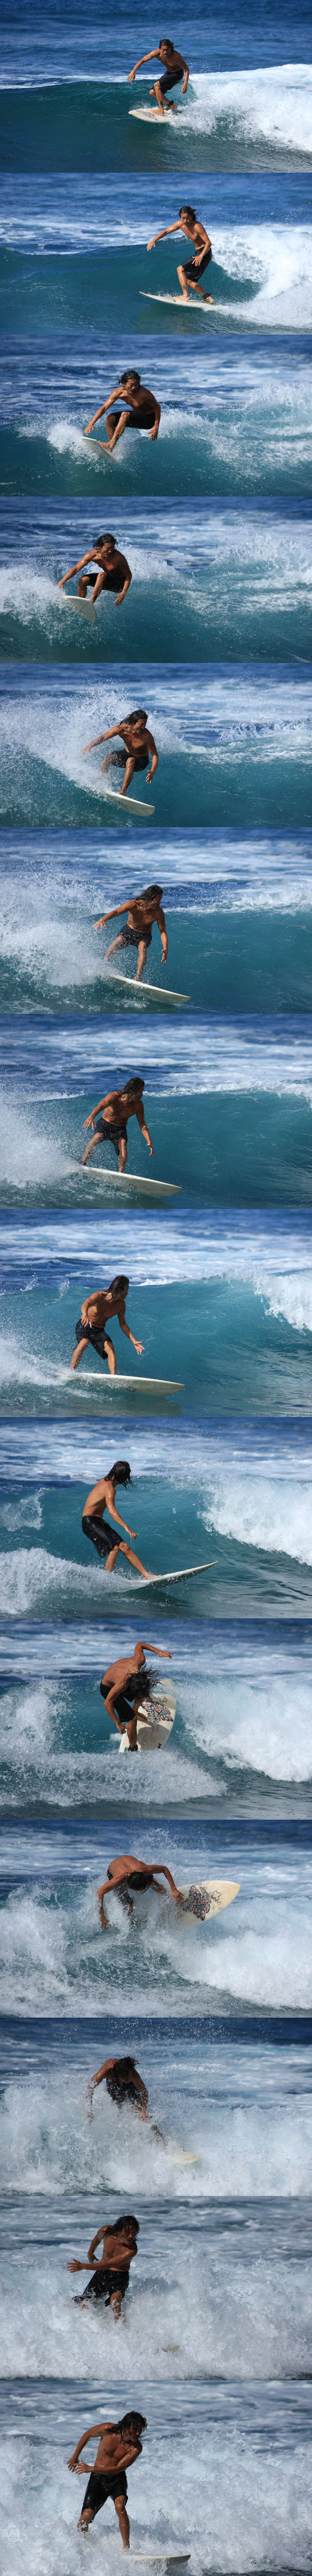 2010_NH_Surfing(sq)_T9977